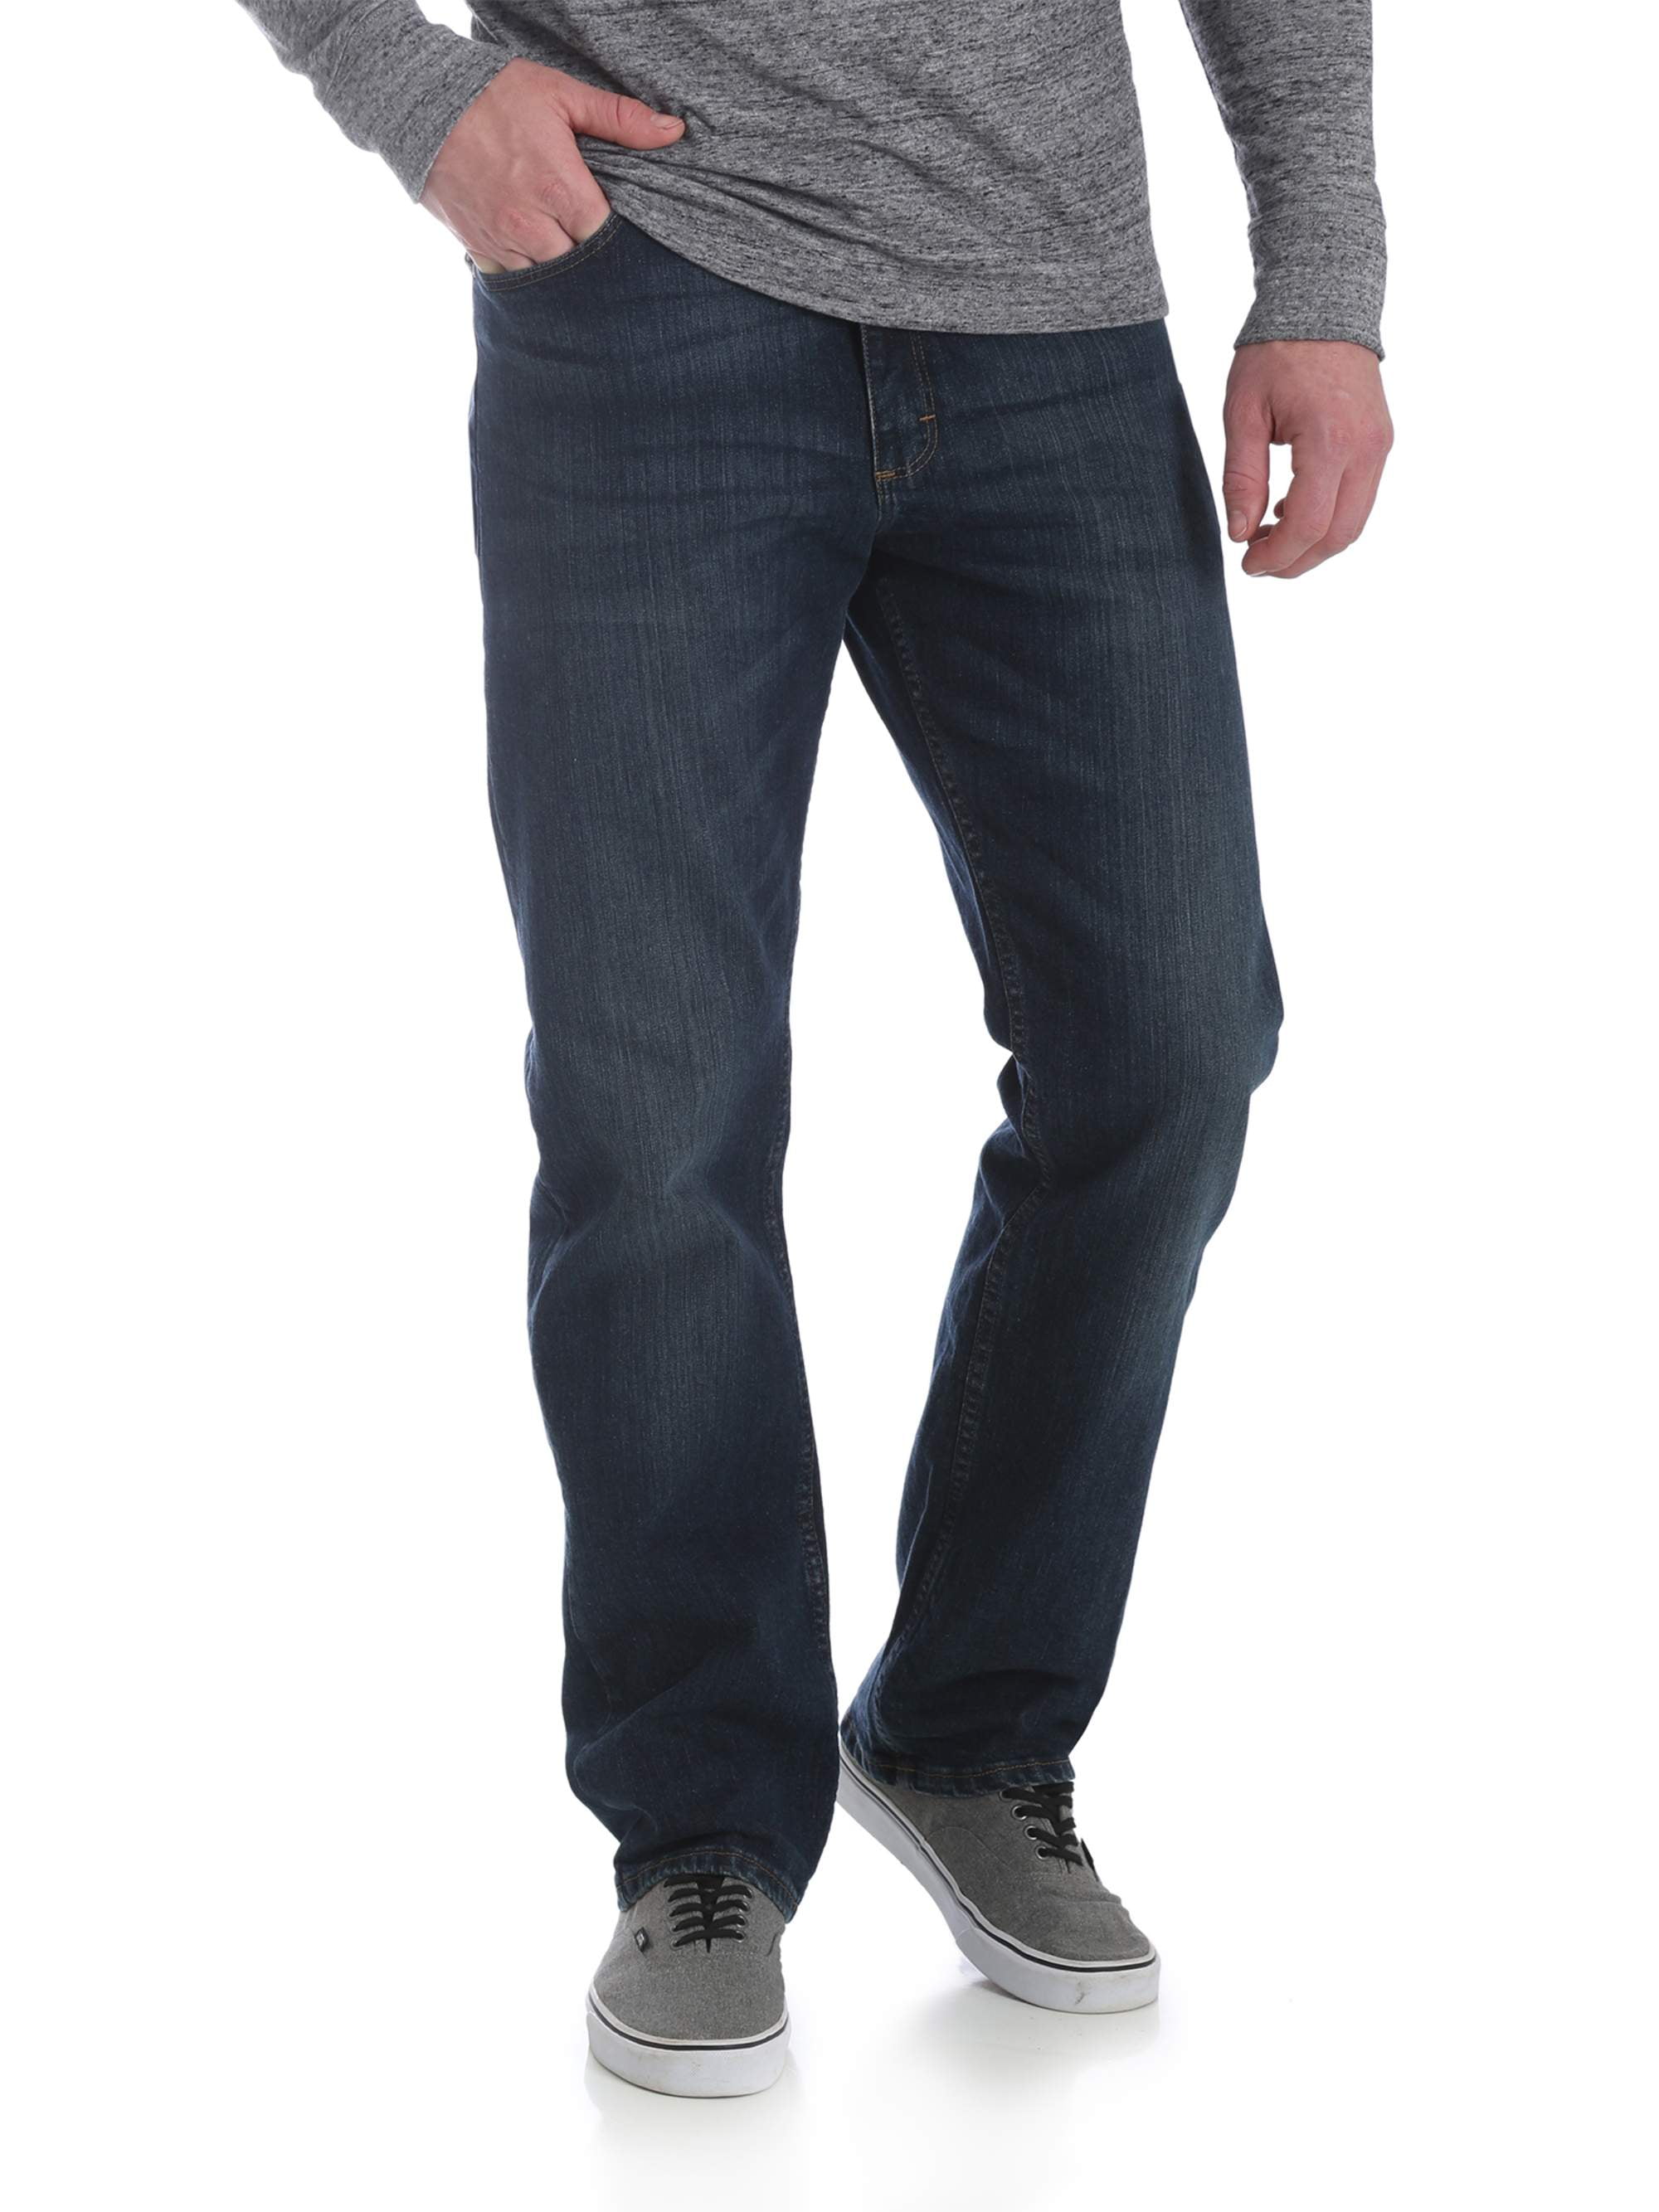 Wrangler Men's and Men's Relaxed Fit with Flex - Walmart.com